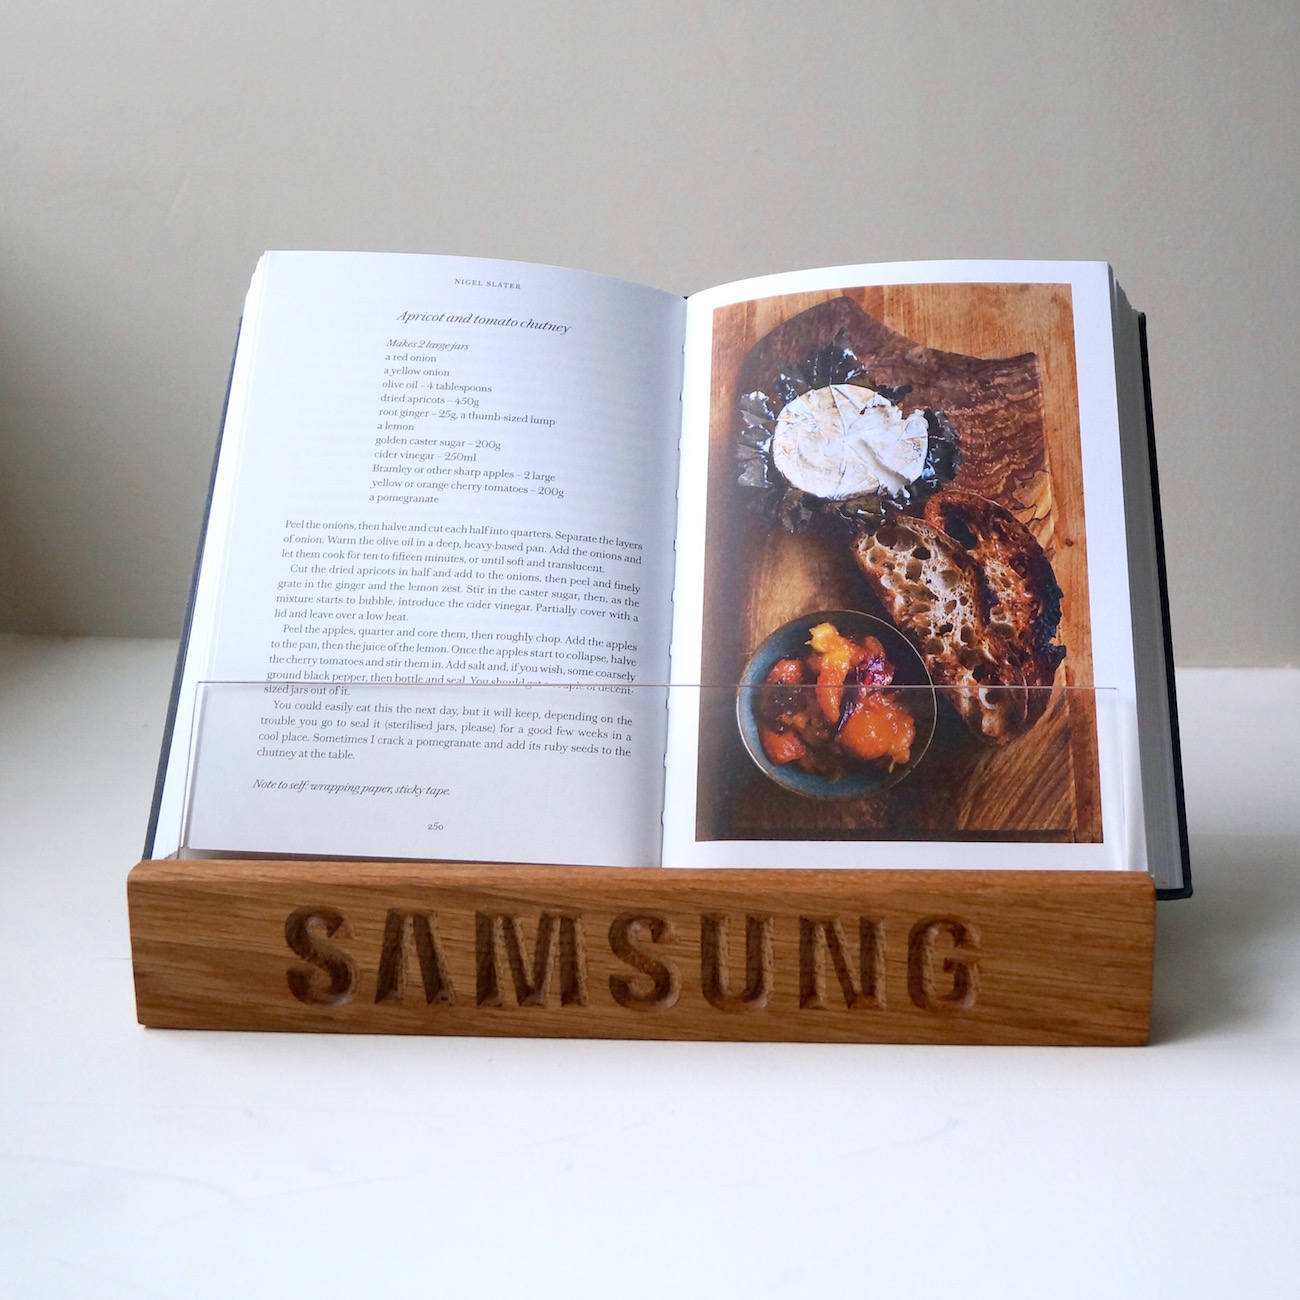 personalised-corporate-wooden-gifts-samsung-makemesomethingspecial.com